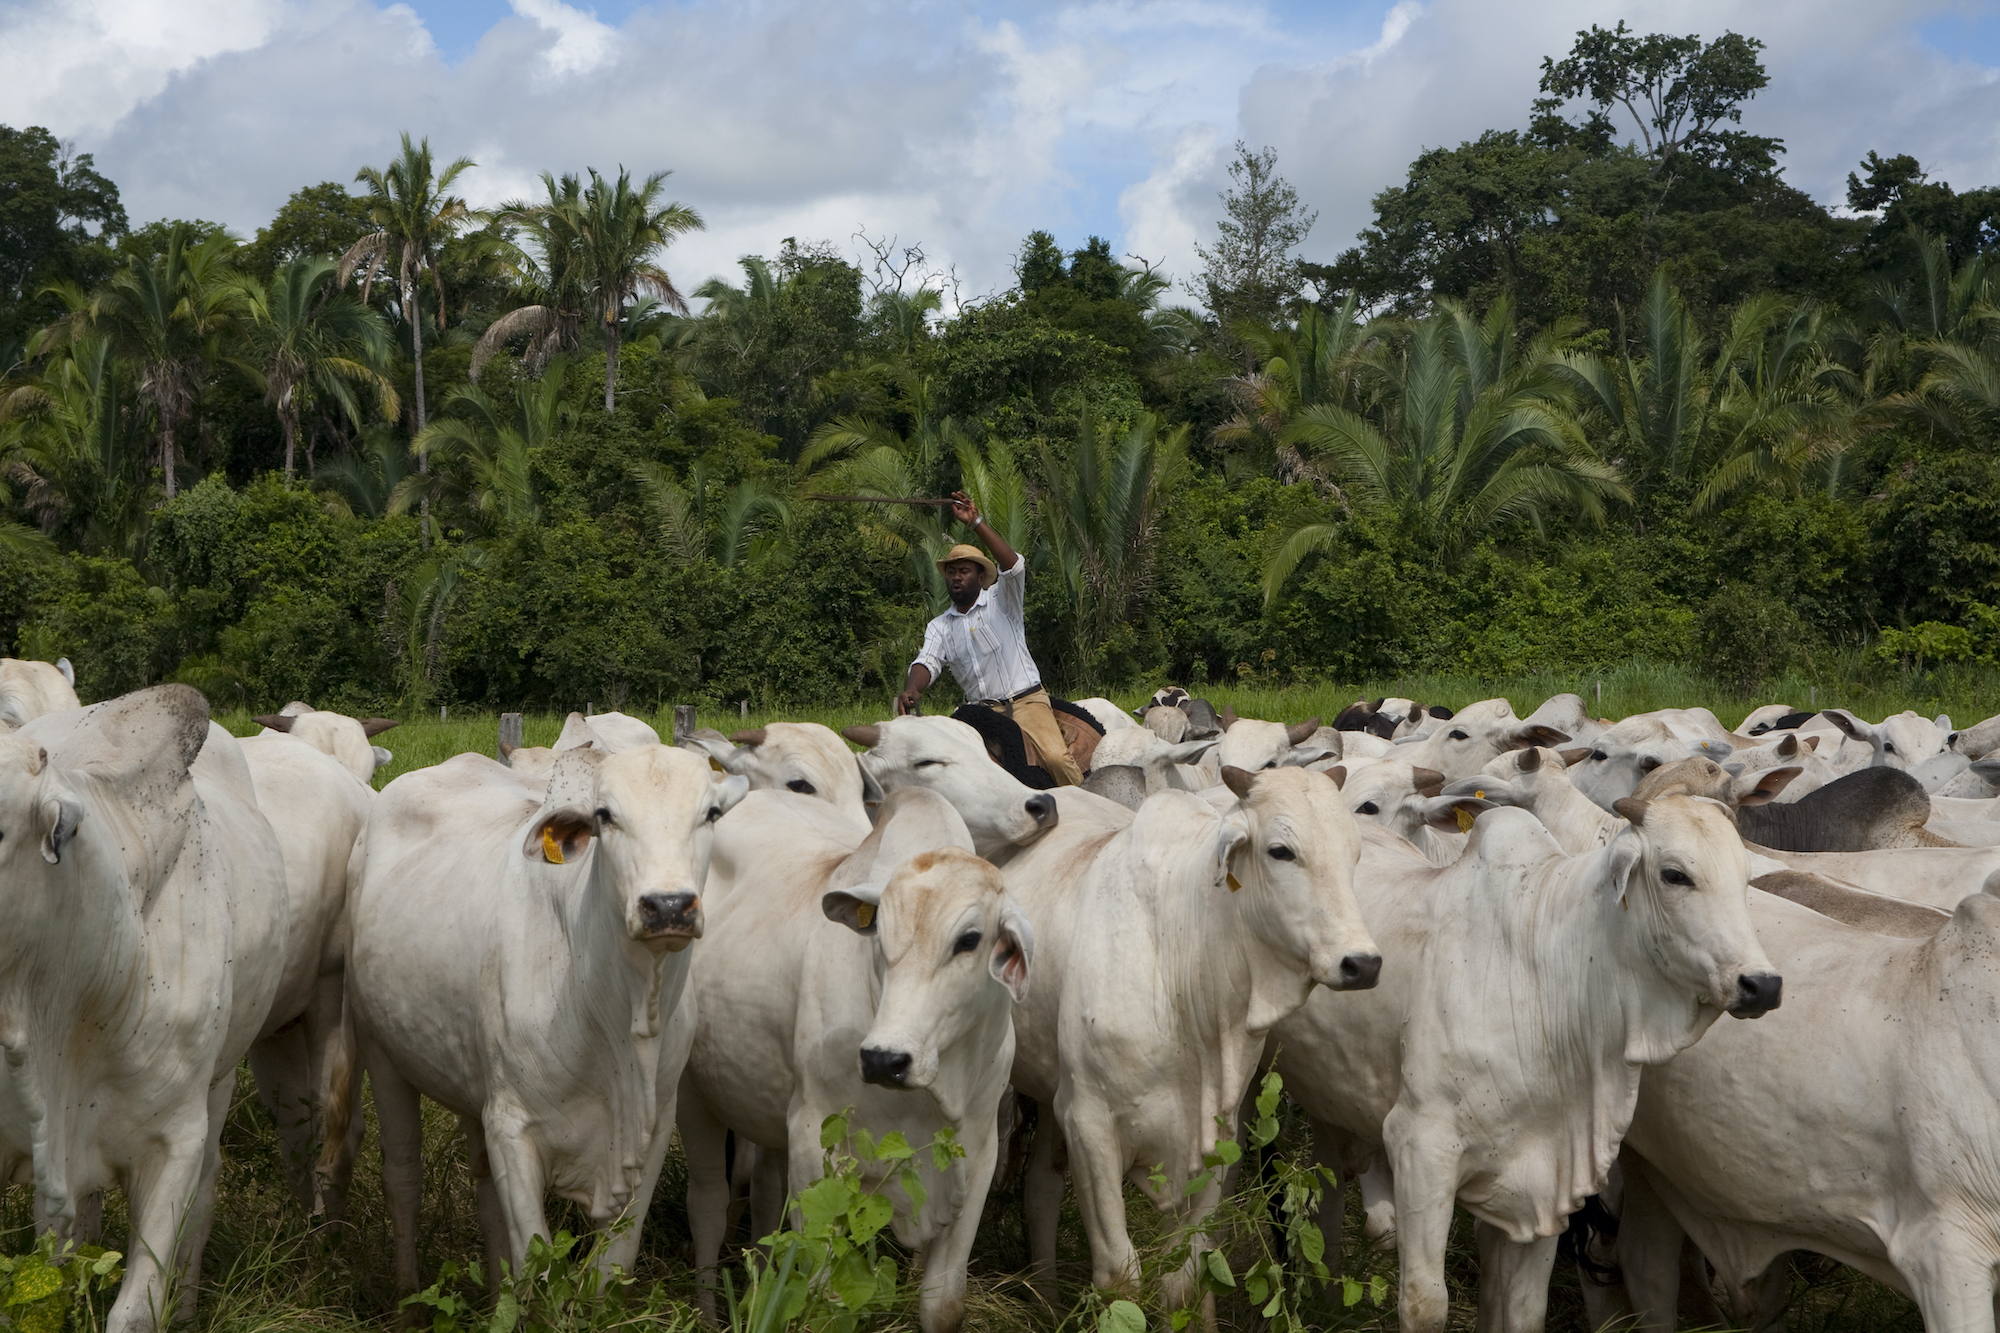 <p>Cattle ranching in Figueirópolis d´Oeste, in the state of Mato Grosso, Brazil. The livestock sector is the primary driver of deforestation in the Brazilian Amazon. (Image © Ricardo Funari / Greenpeace)</p>